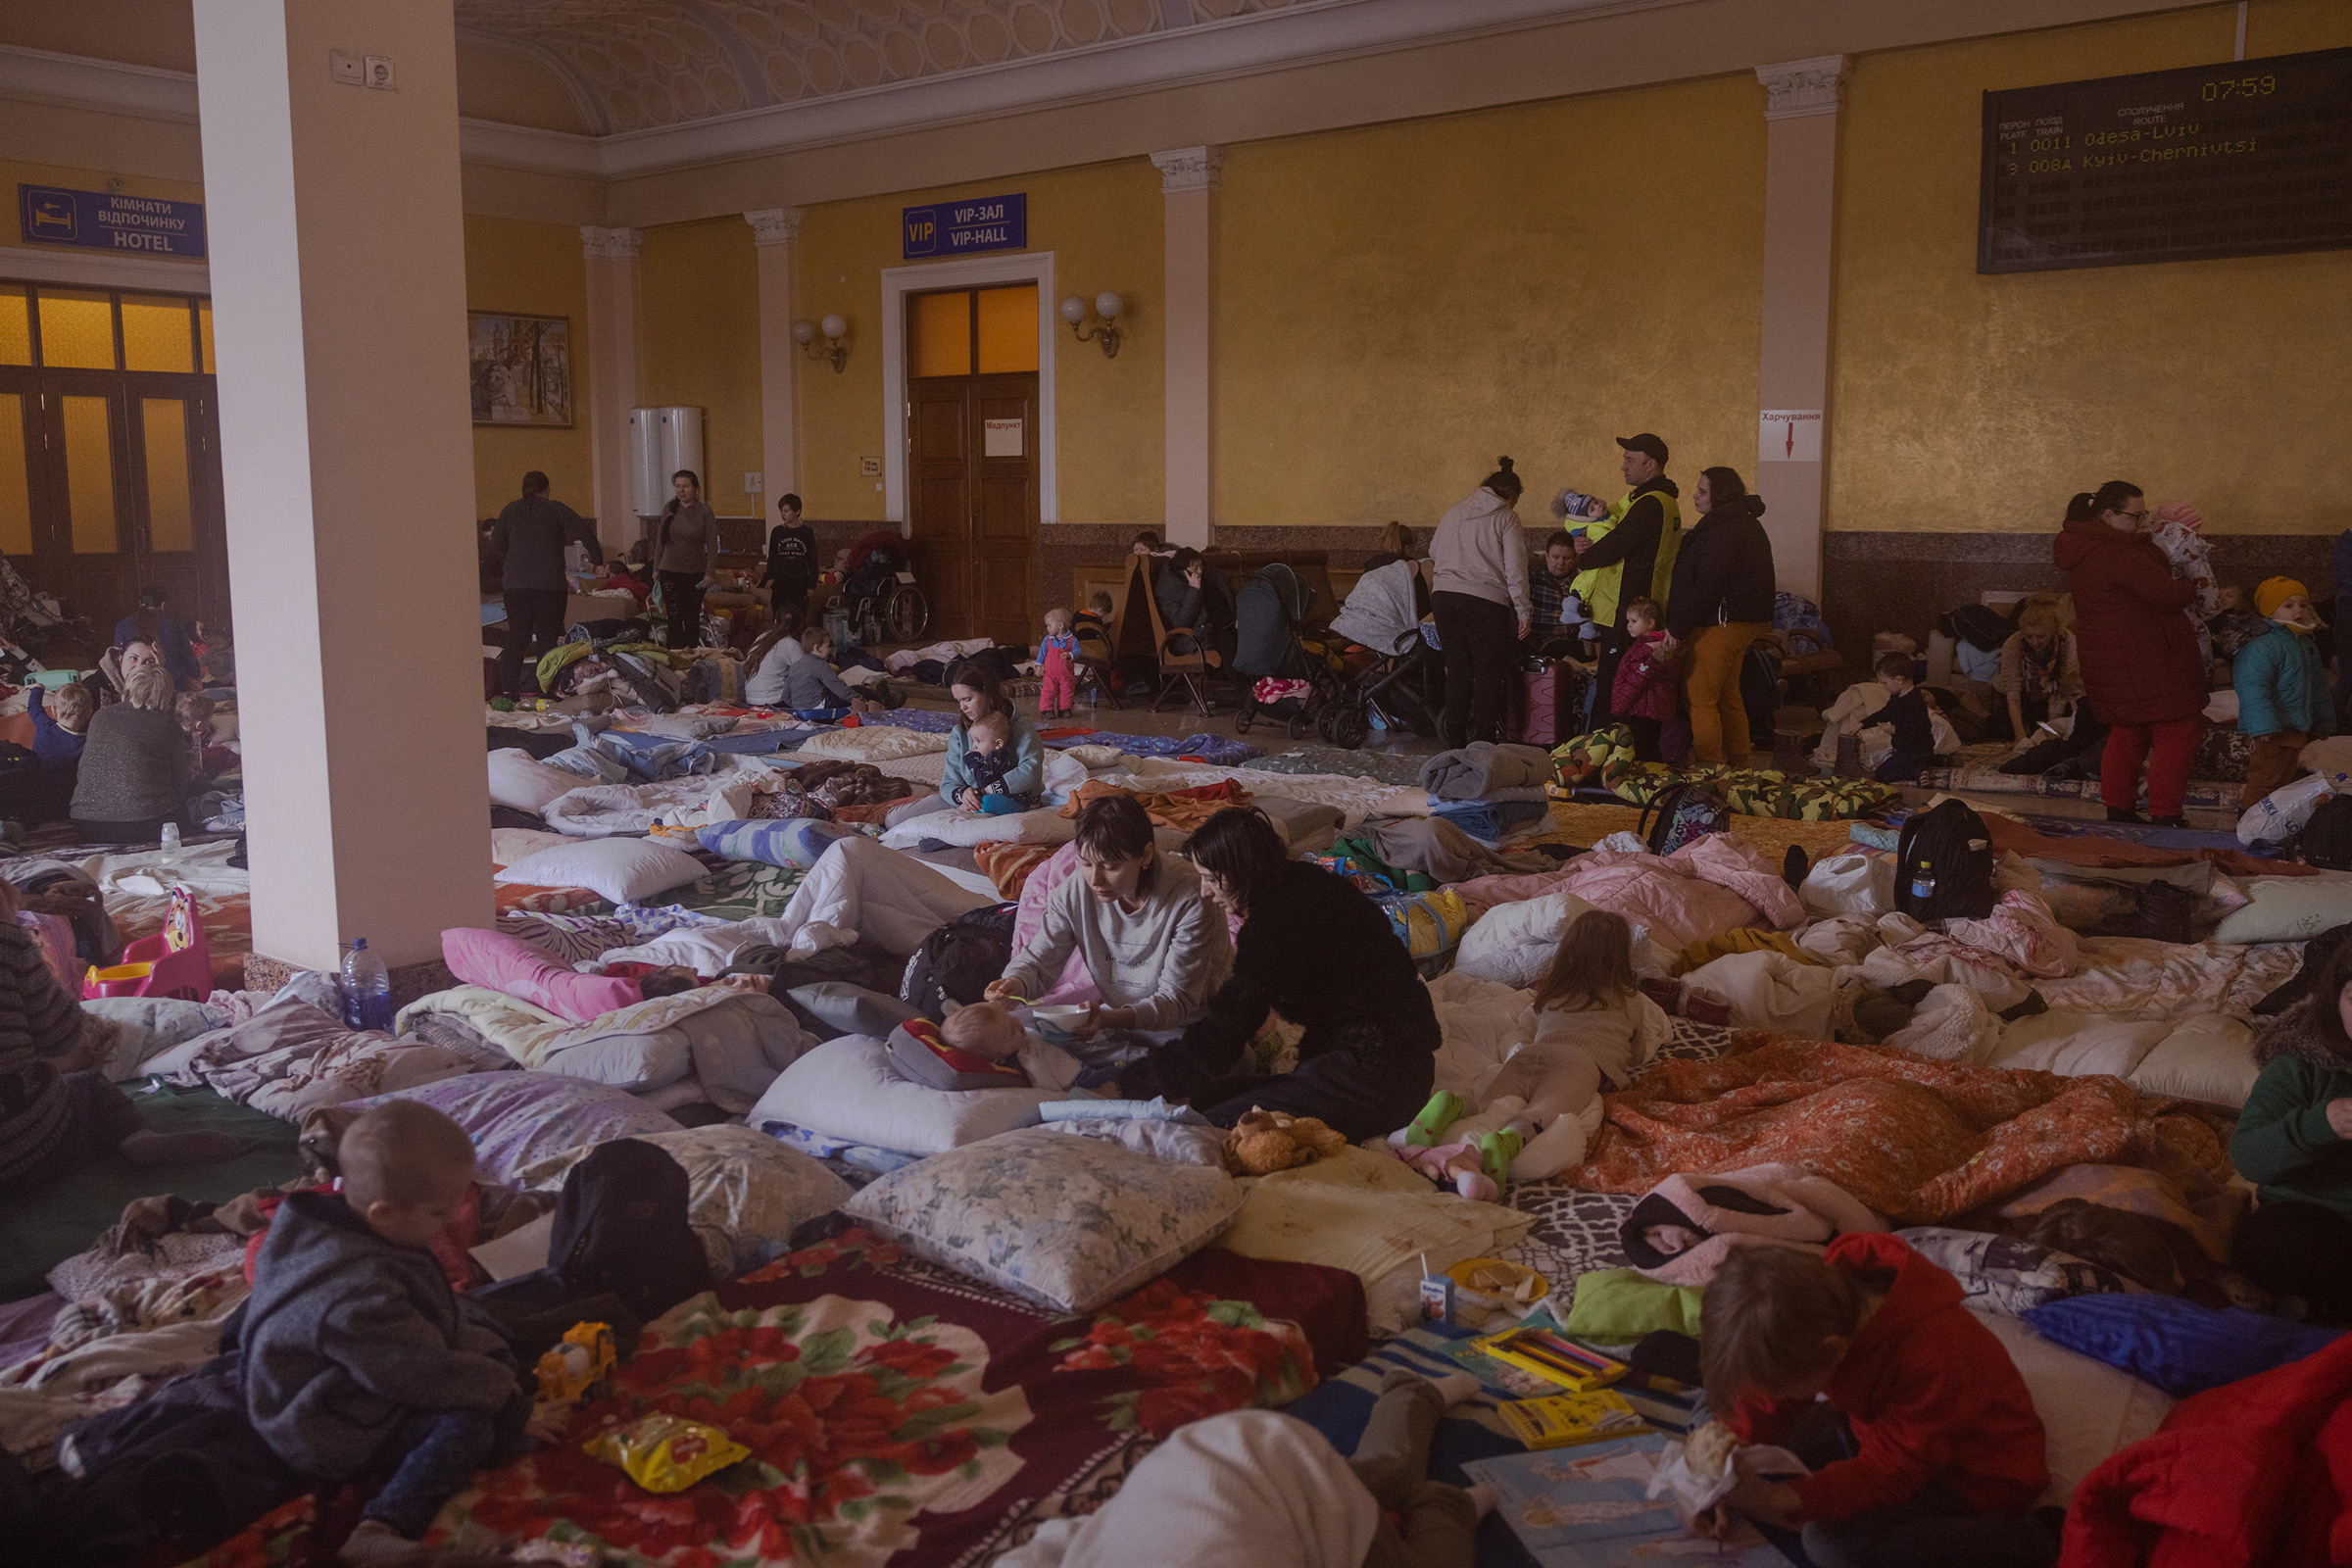 In a room upstairs in the Lviv train station, designated as a shelter for women and children, many take a moment to rest, on March 8. (Natalie Keyssar for TIME)